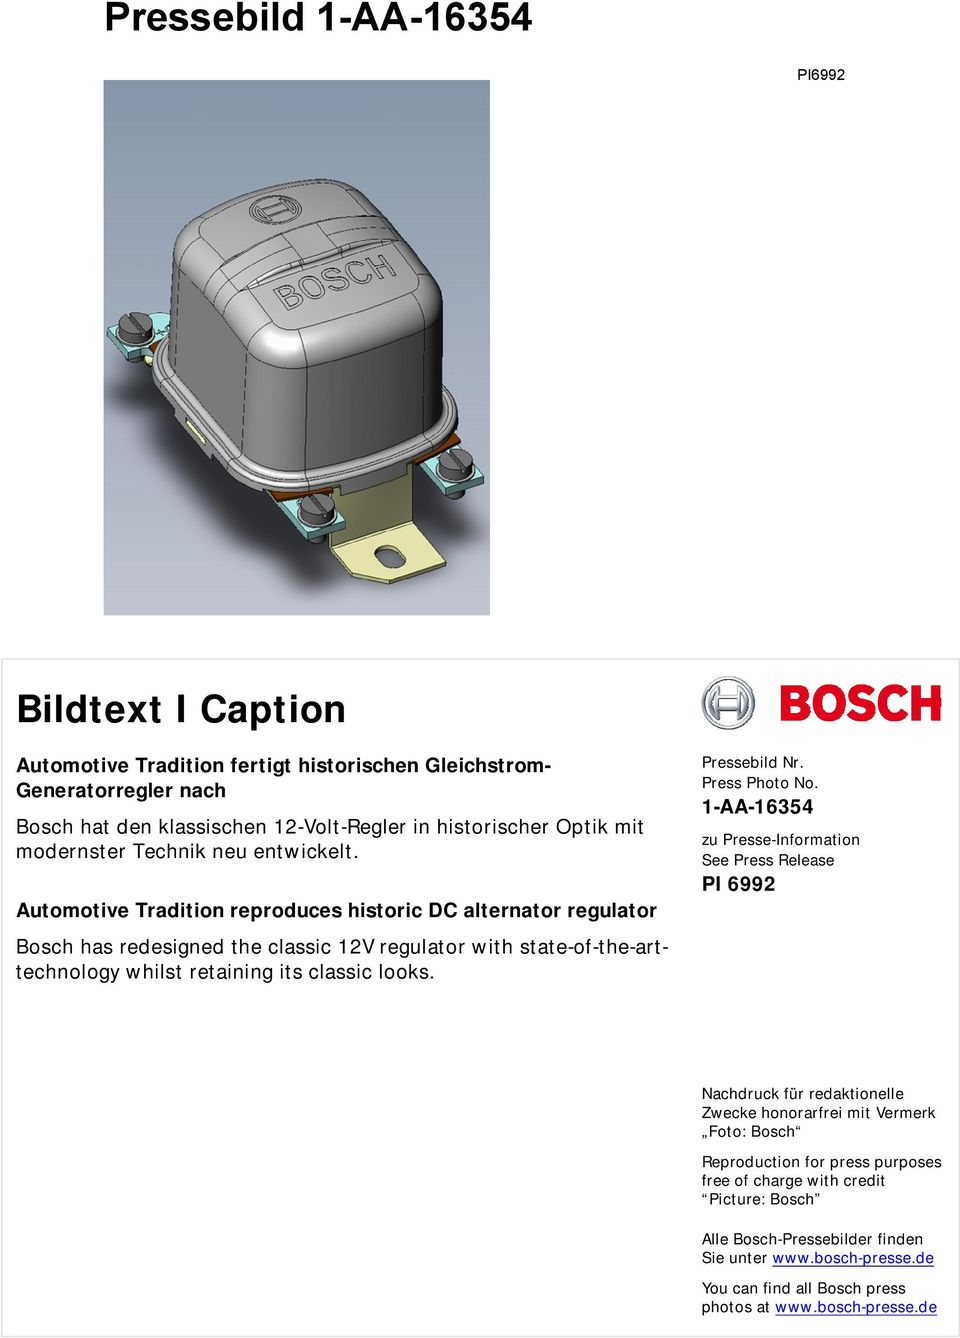 Automotive Tradition reproduces historic DC alternator regulator Bosch has redesigned the classic 12V regulator with state-of-the-arttechnology whilst retaining its classic looks.